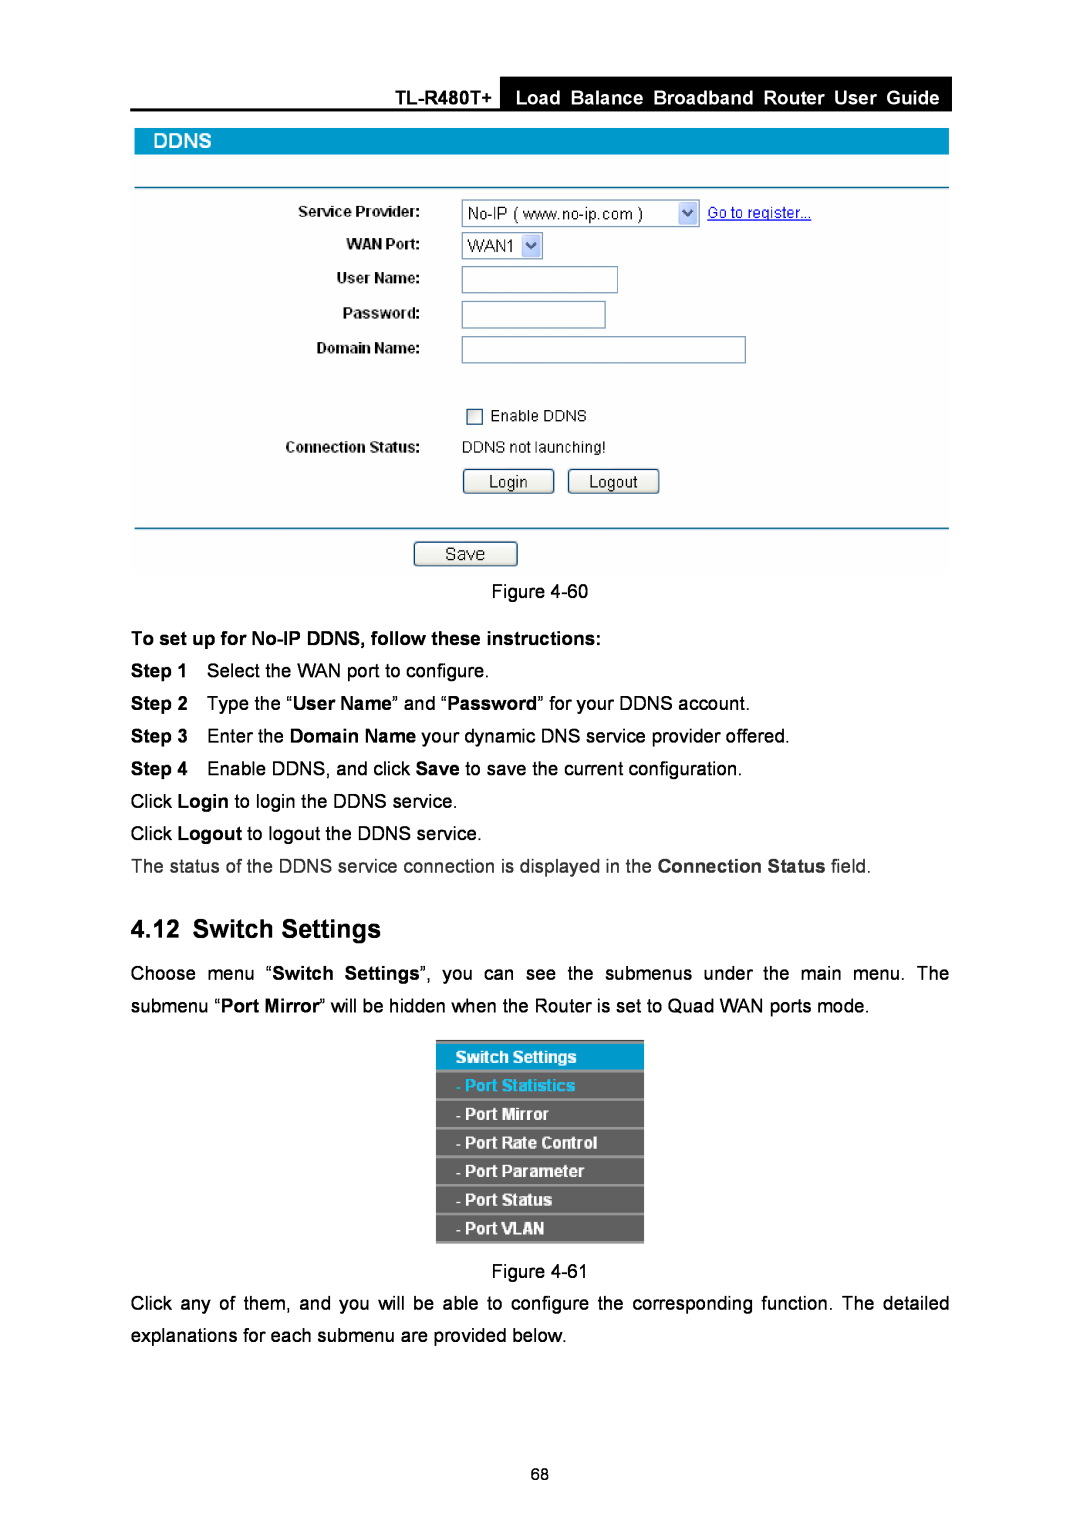 TP-Link TL-R480T+ manual Switch Settings, Load Balance Broadband Router User Guide 